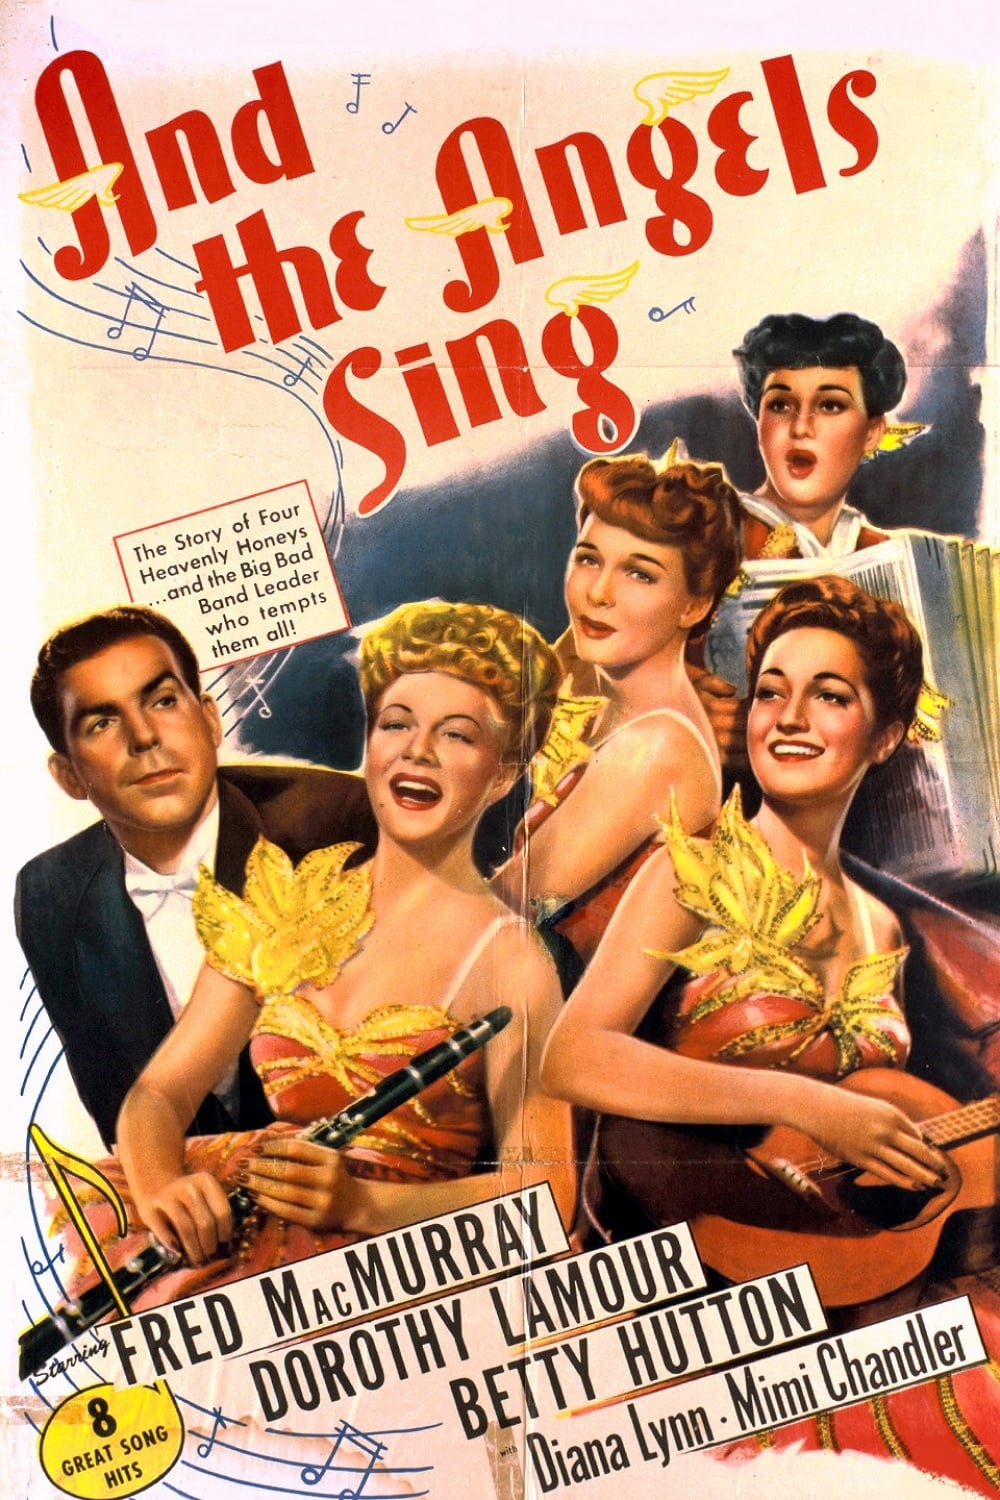 And the Angels Sing (1944)